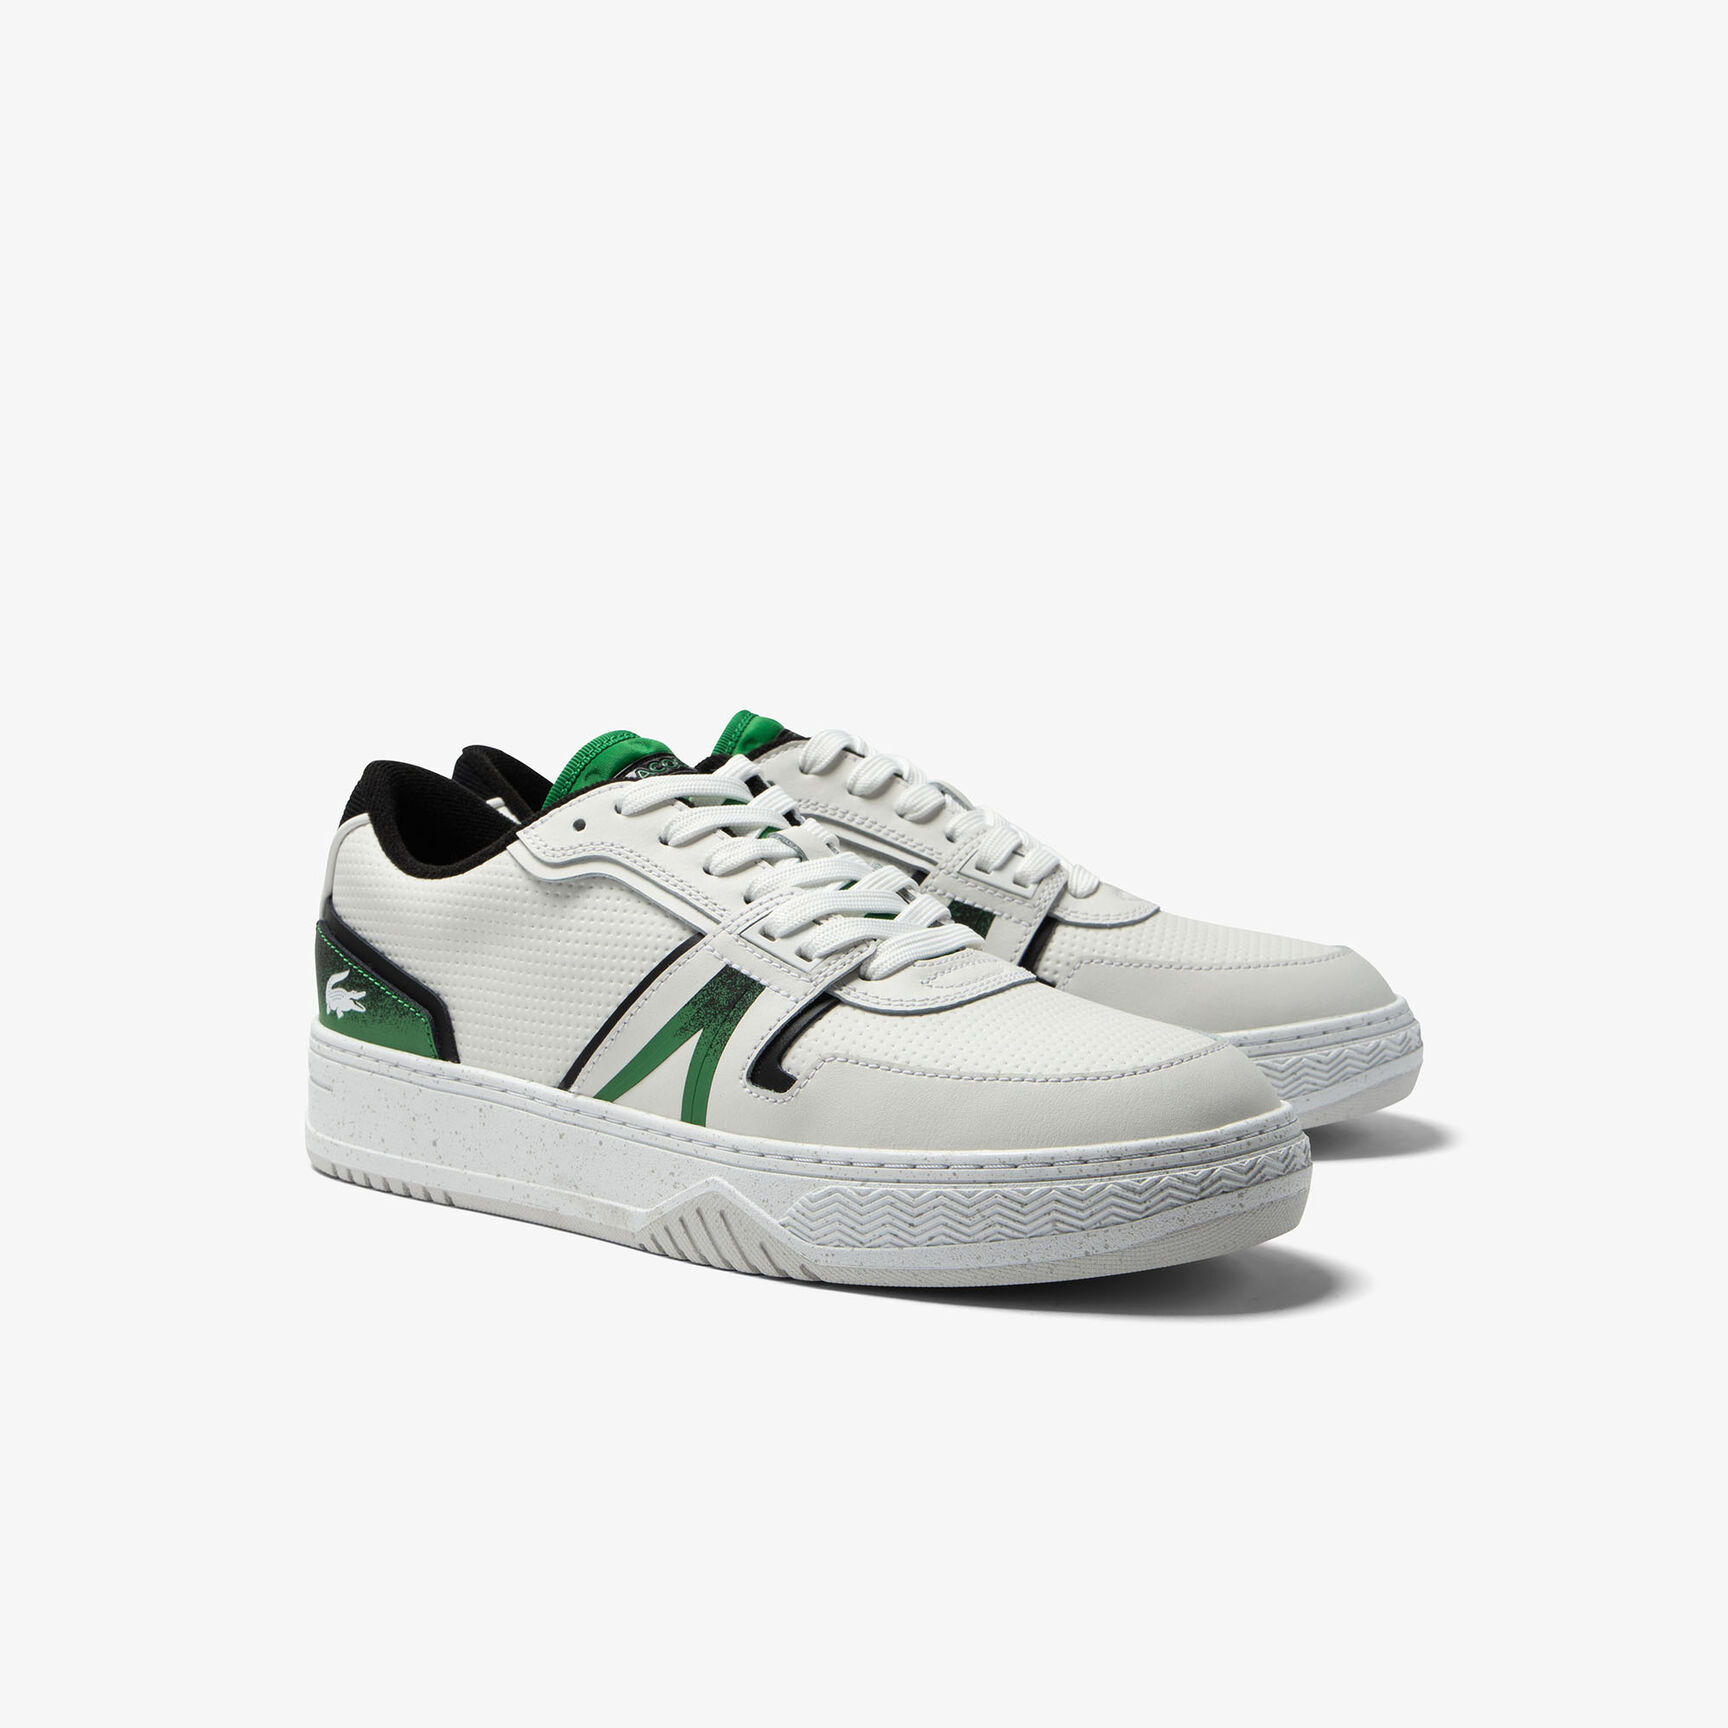 Buy Men's Lacoste L001 Leather Spray Print Trainers | Lacoste UAE